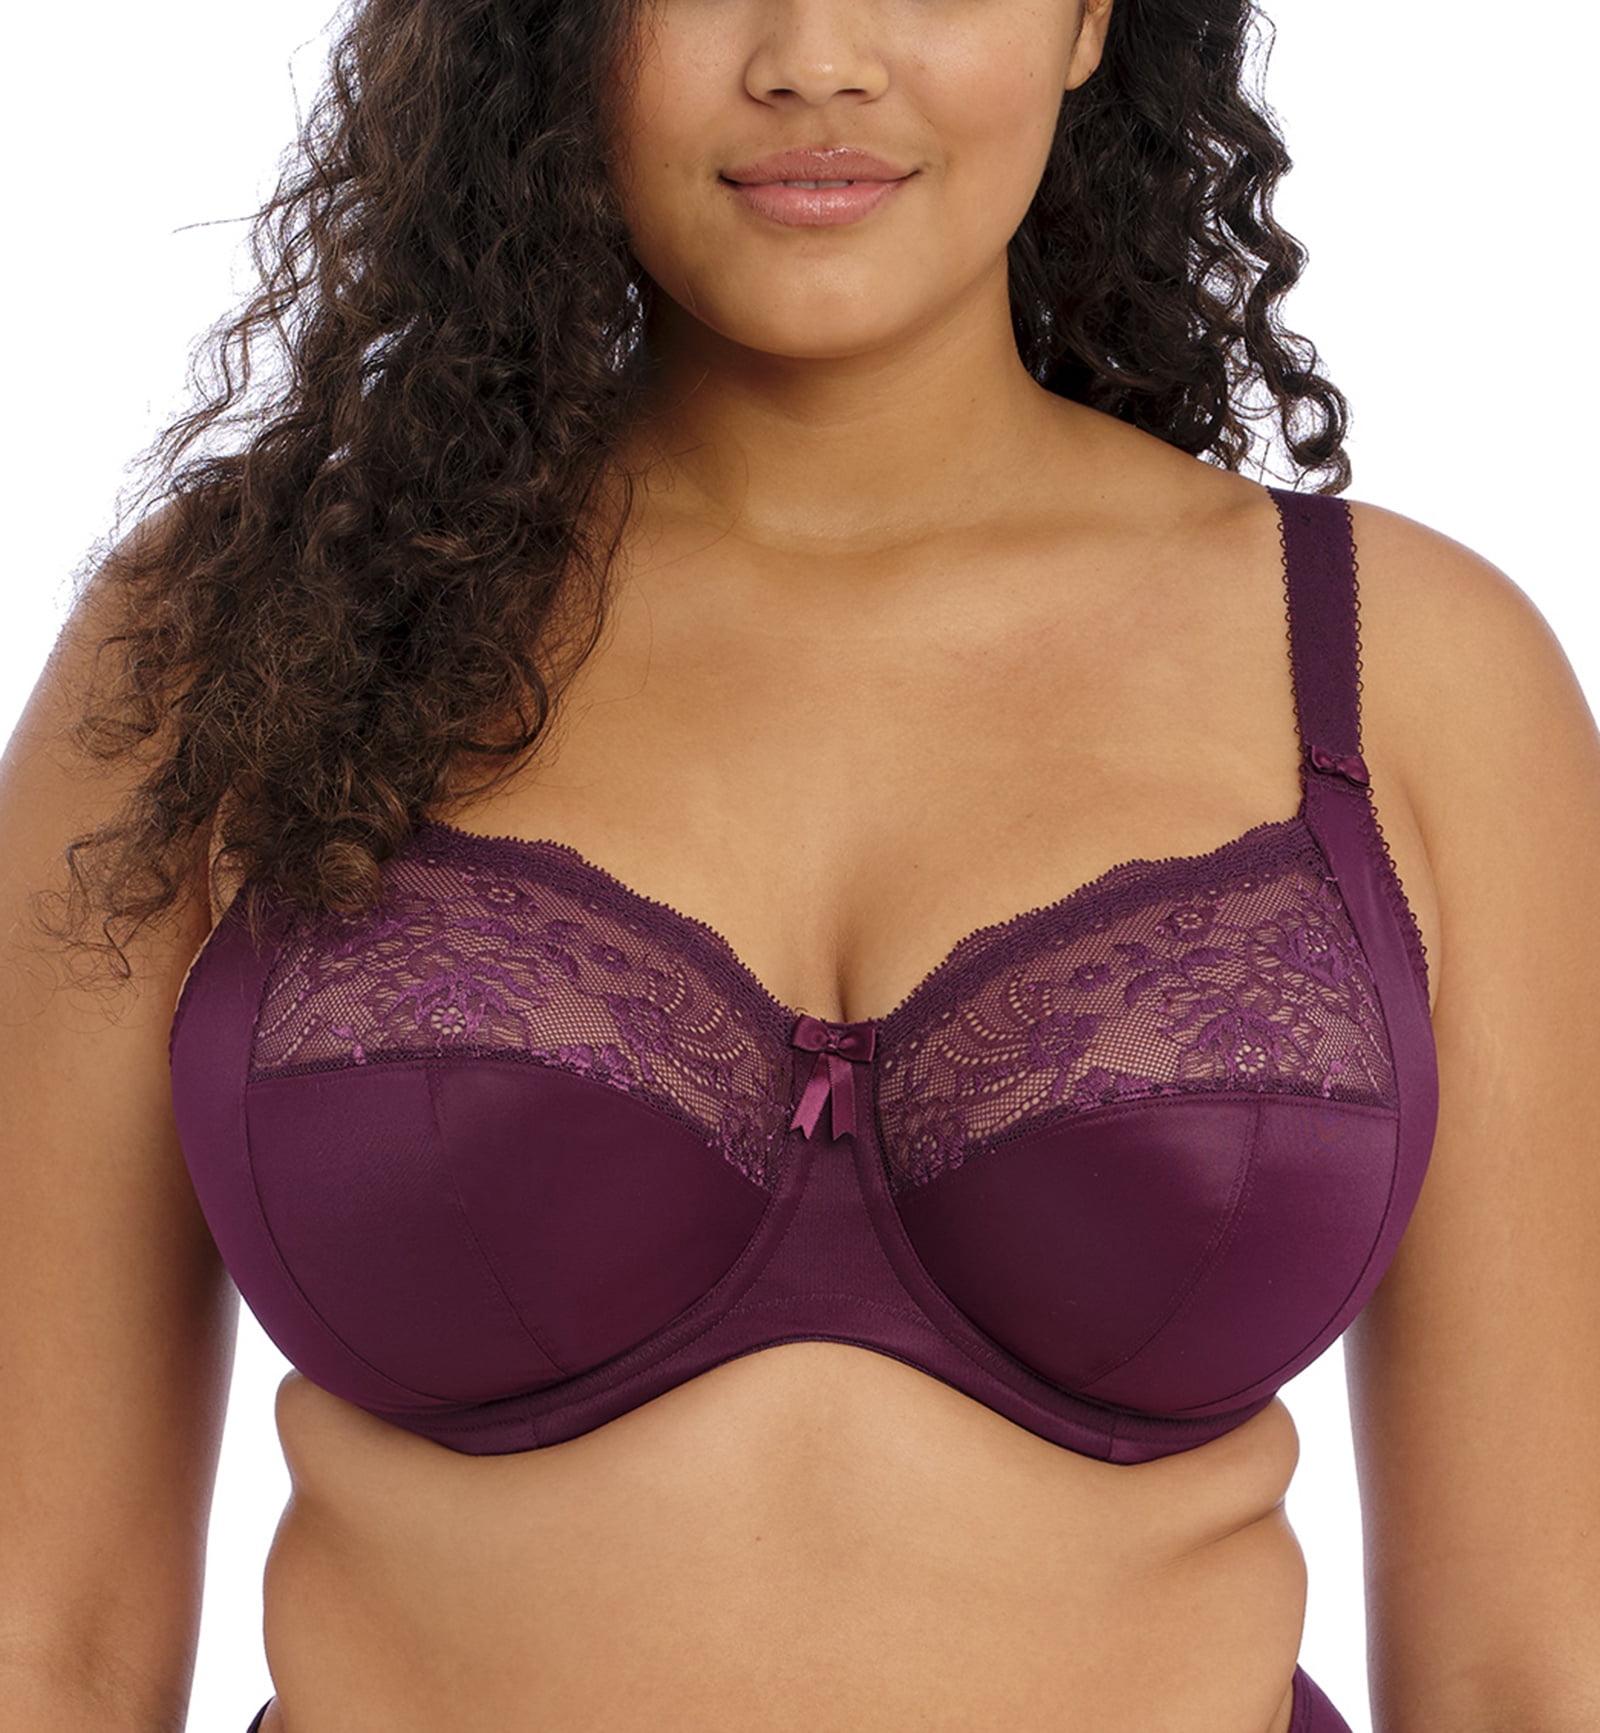 Elomi Morgan Stretch Lace Banded Underwire Bra (4111),38GG,Deep Teal